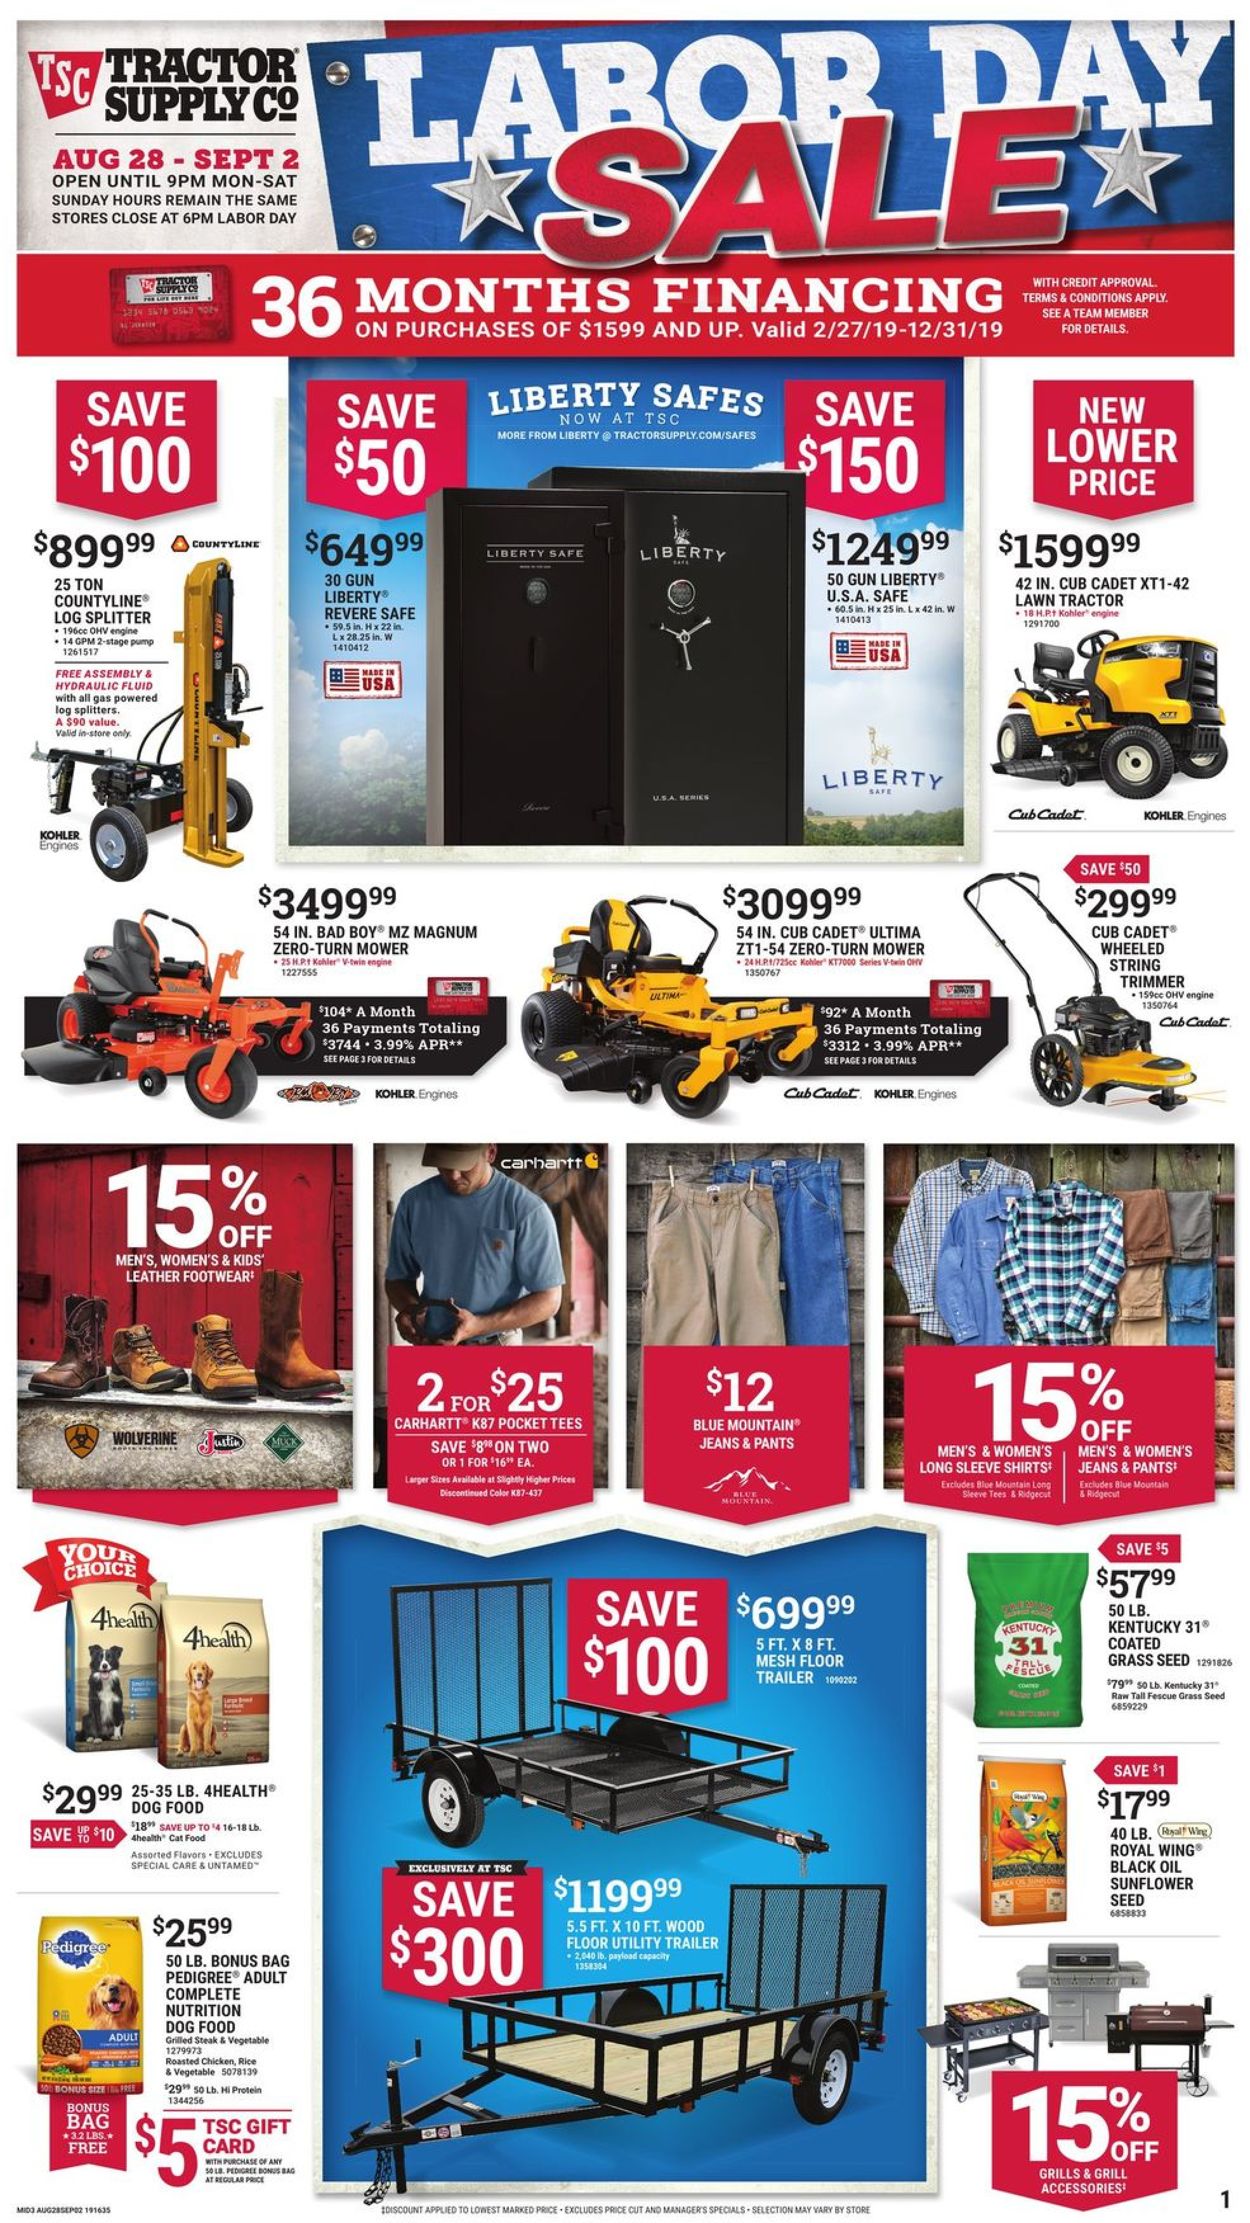 Tractor Supply Current weekly ad 08/28 09/02/2019 frequent ads com